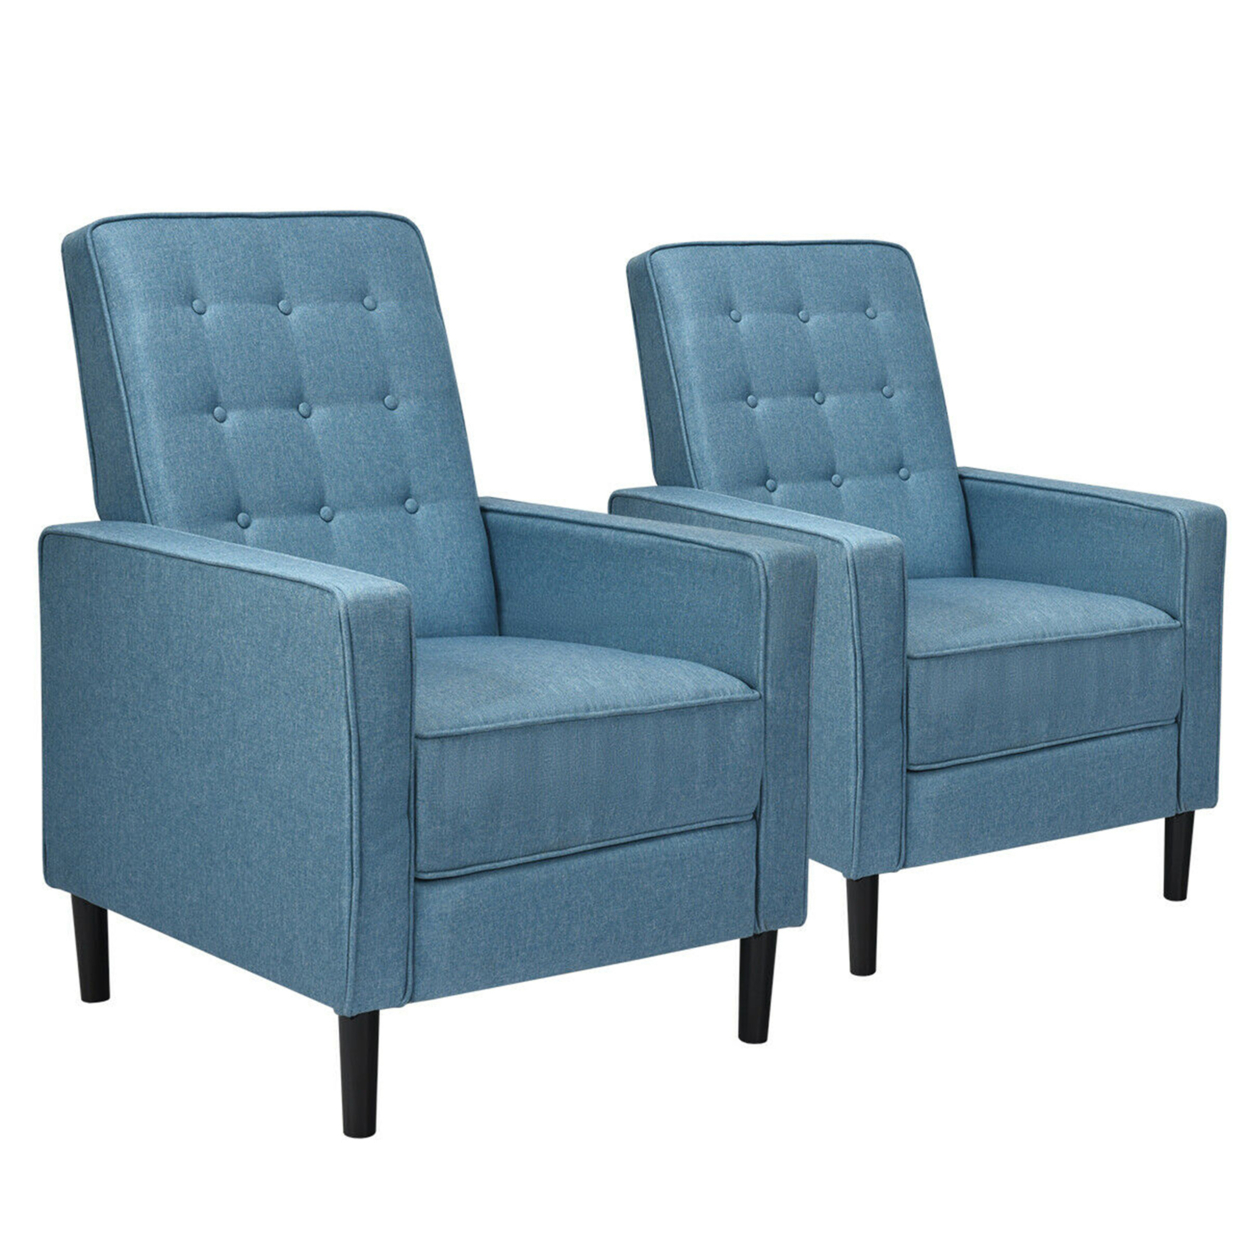 Set Of 2 Push Back Recliner Chair Fabric Tufted Single Sofa W/ Footrest - Blue